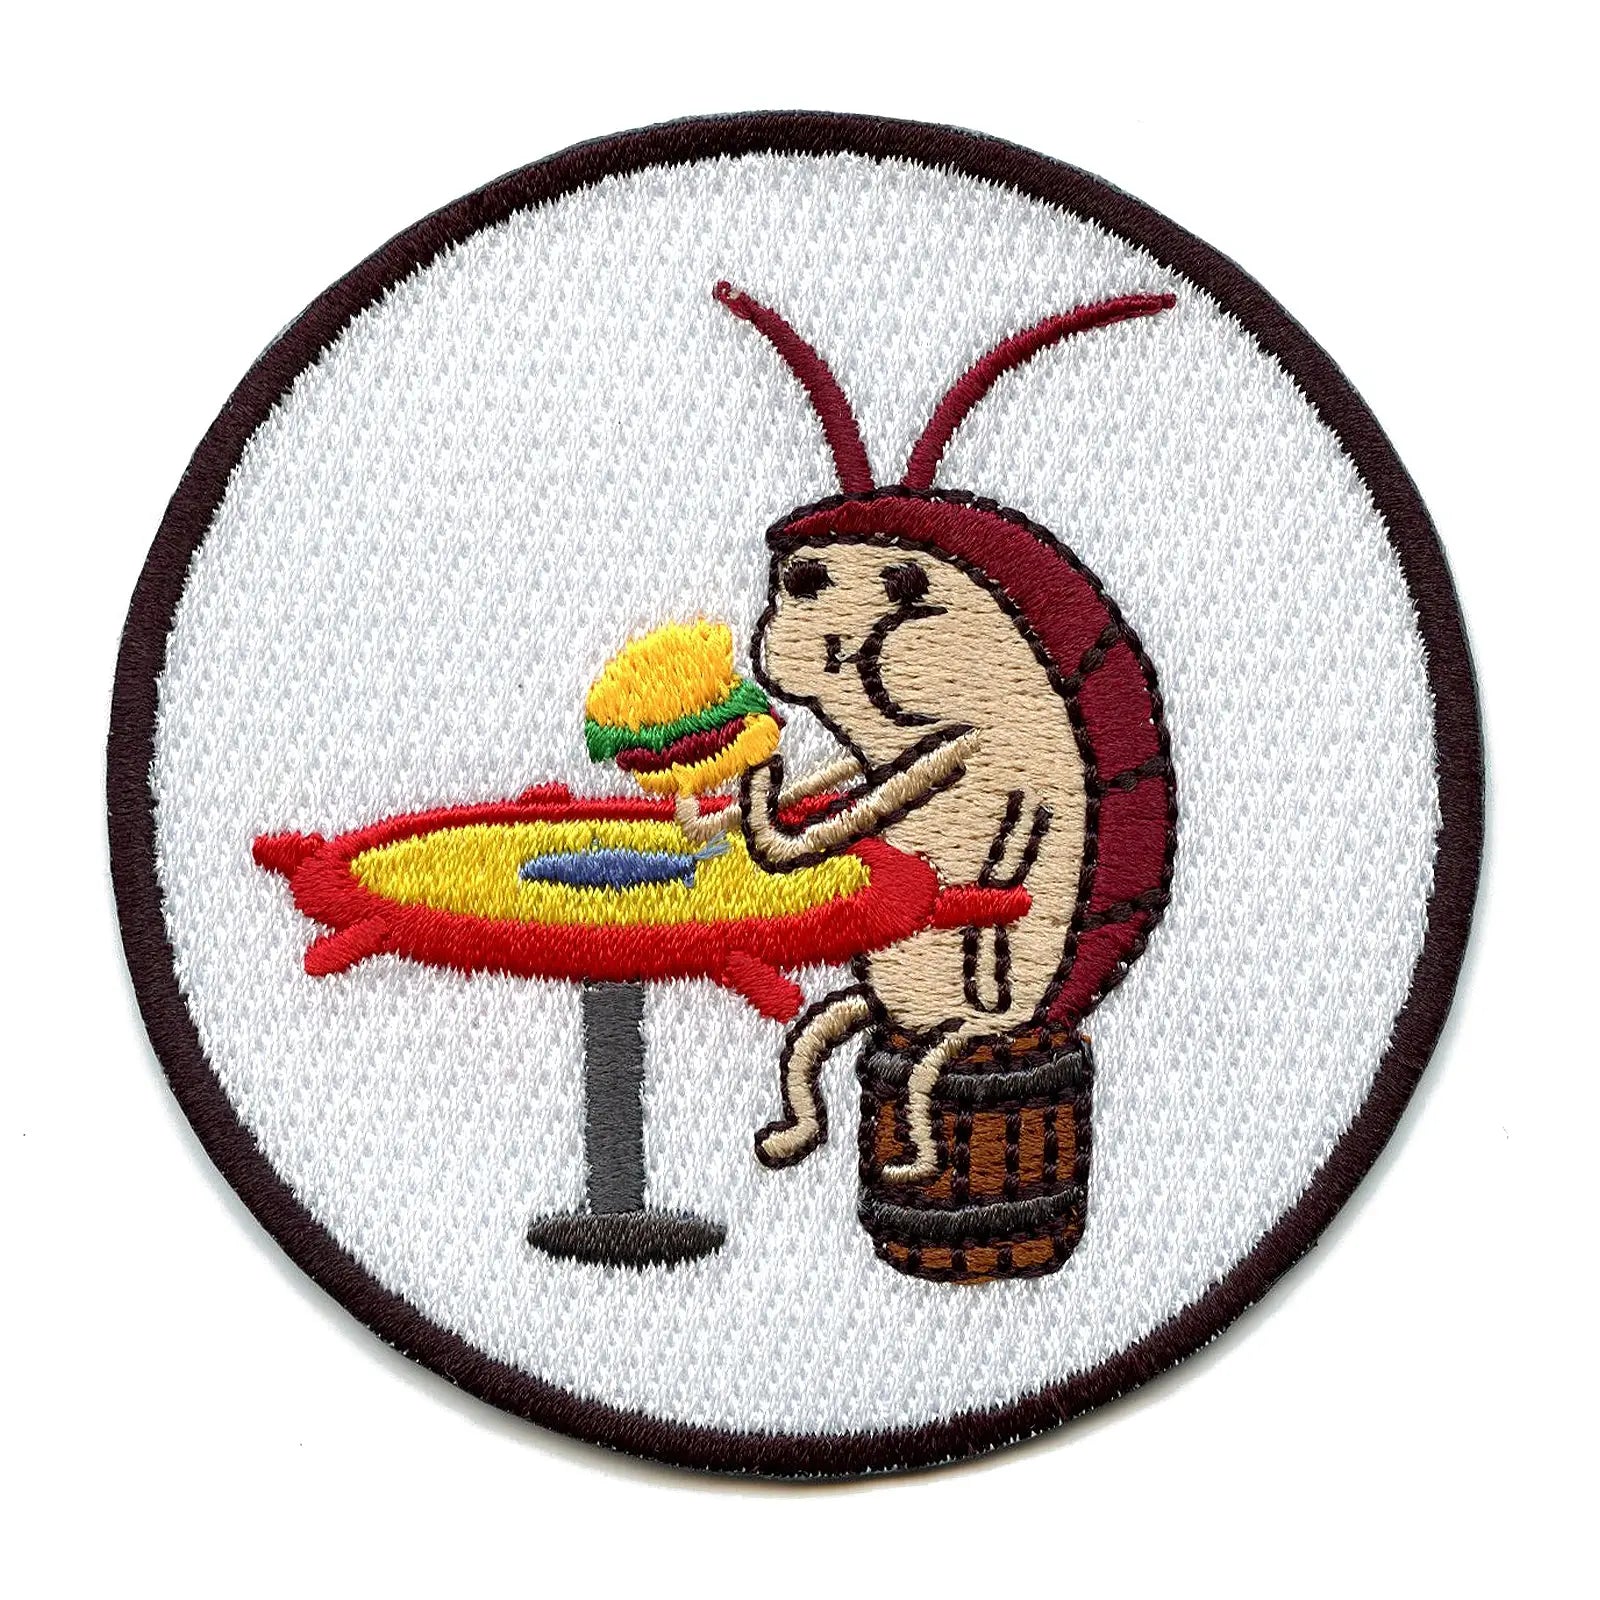 Cartoon Roach Eating Burger Embroidered Iron On Patch 